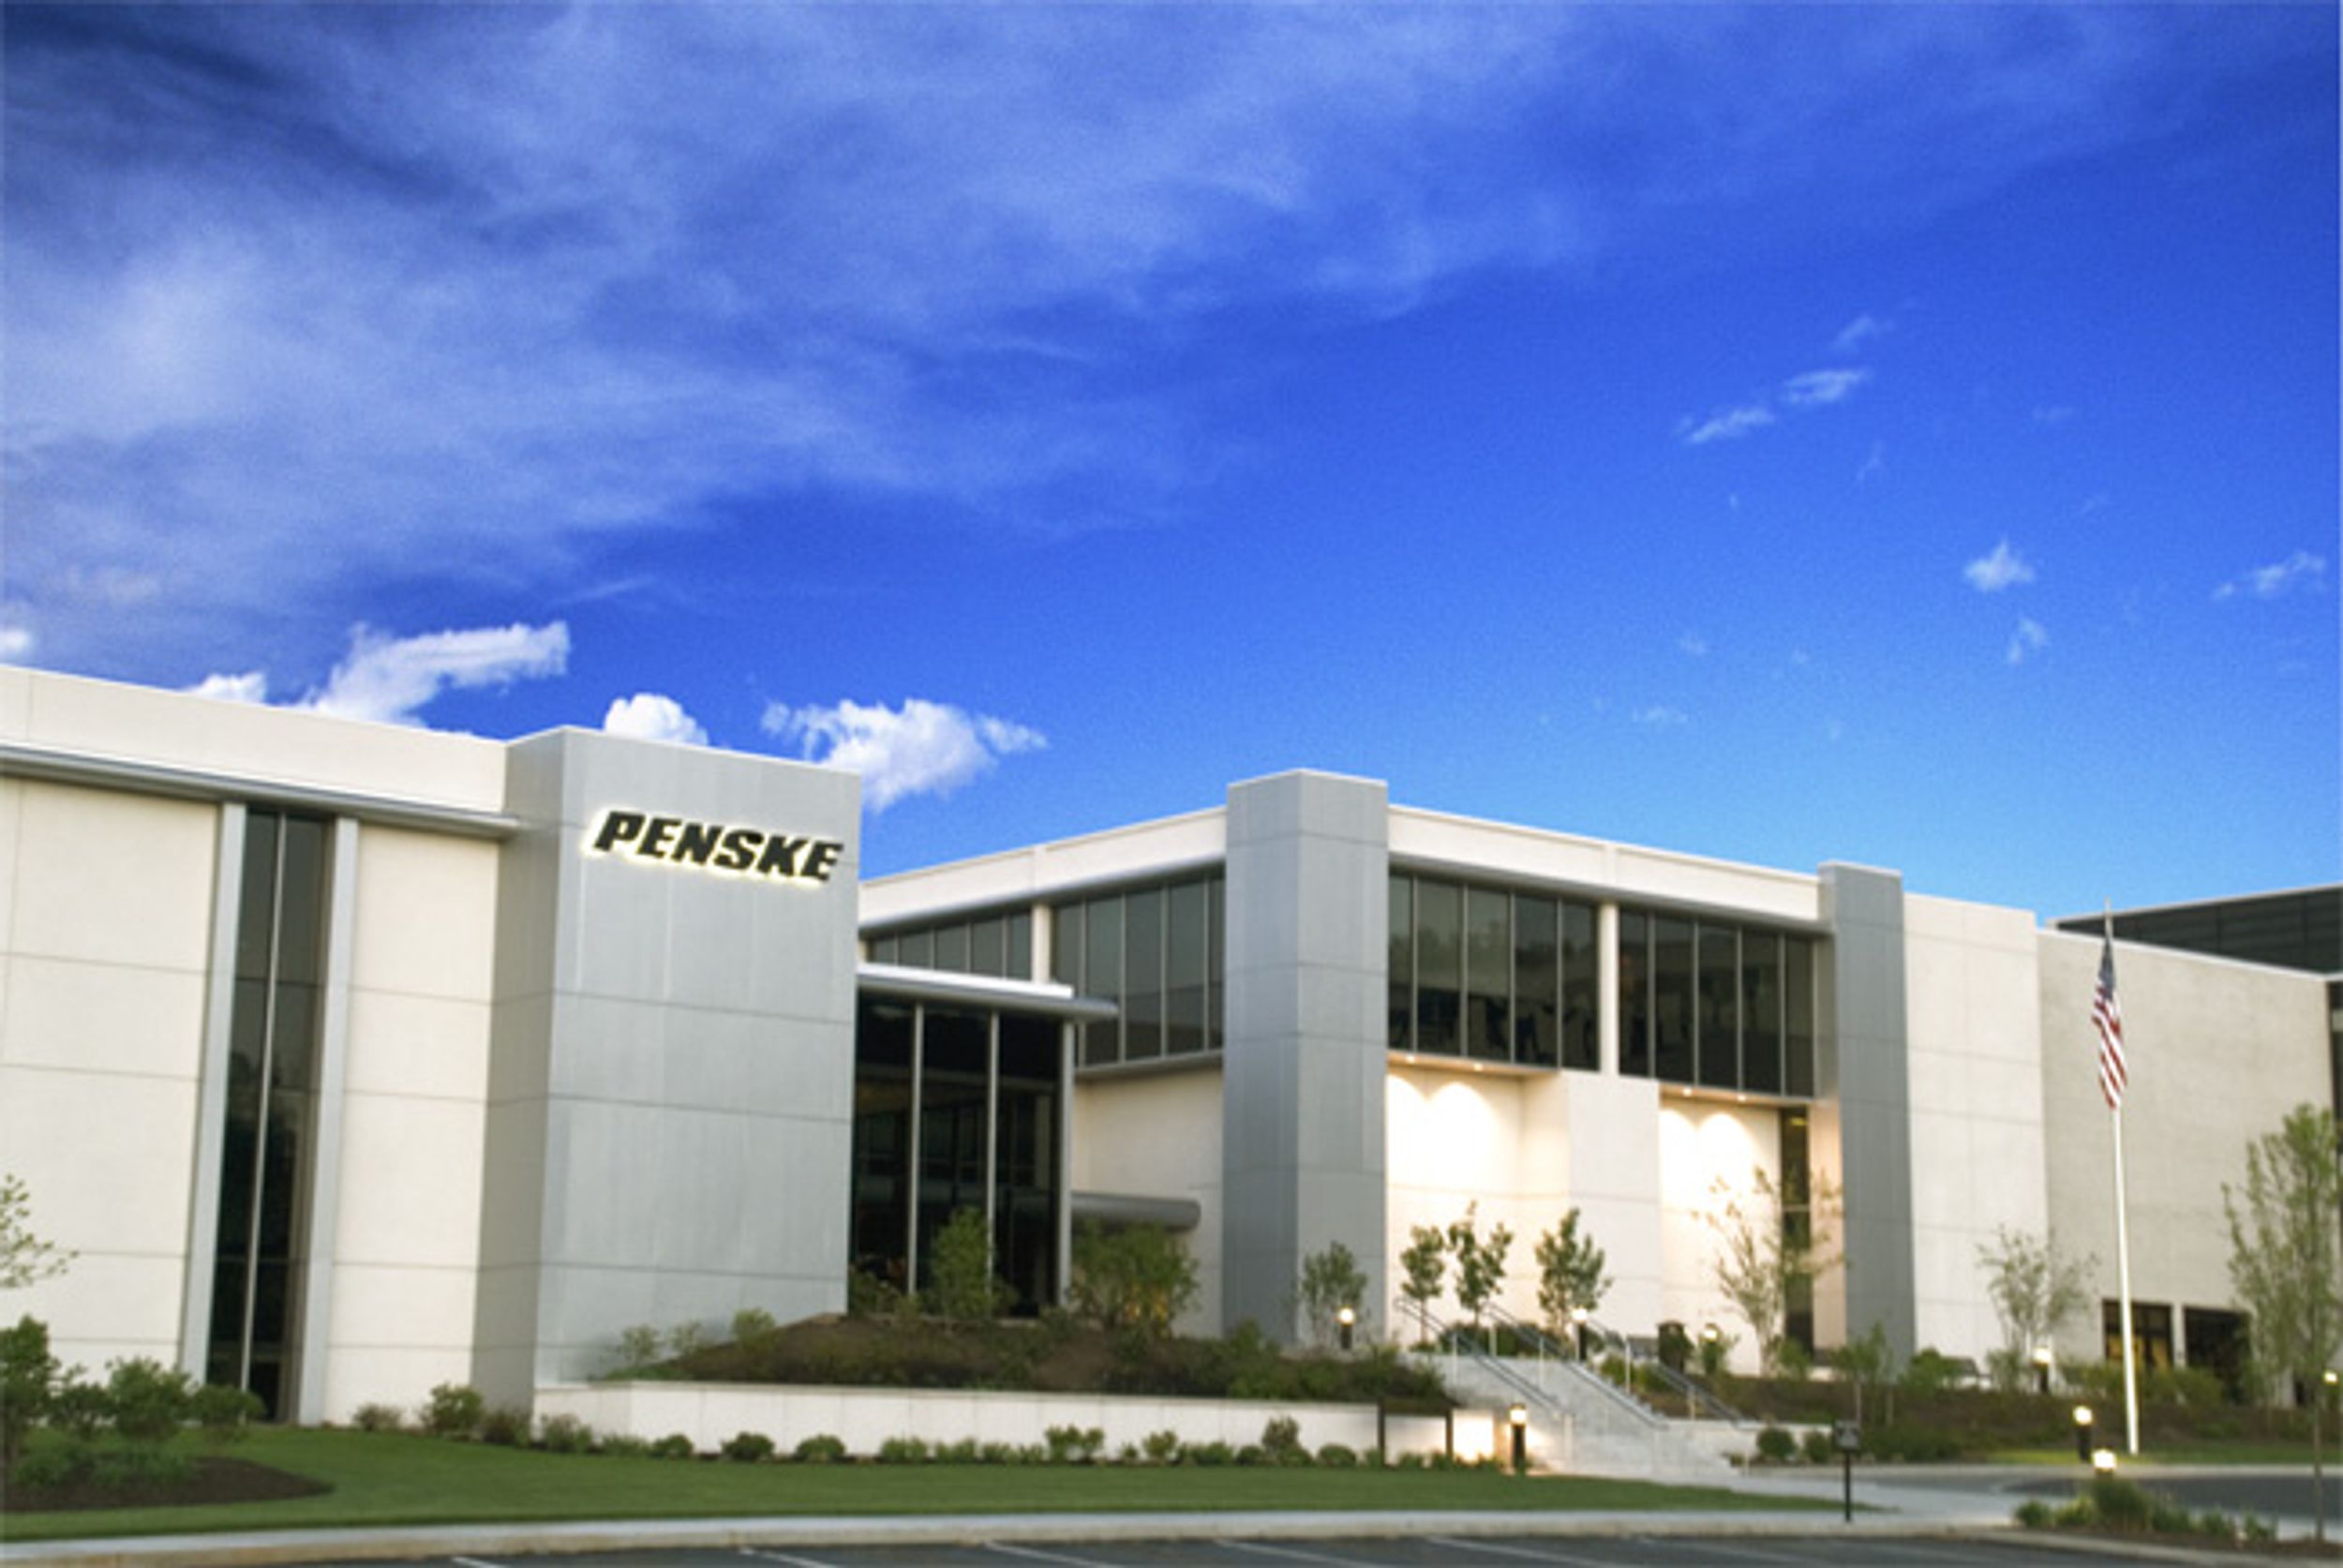 Penske Ranked As Top Employer by Pa. Magazine